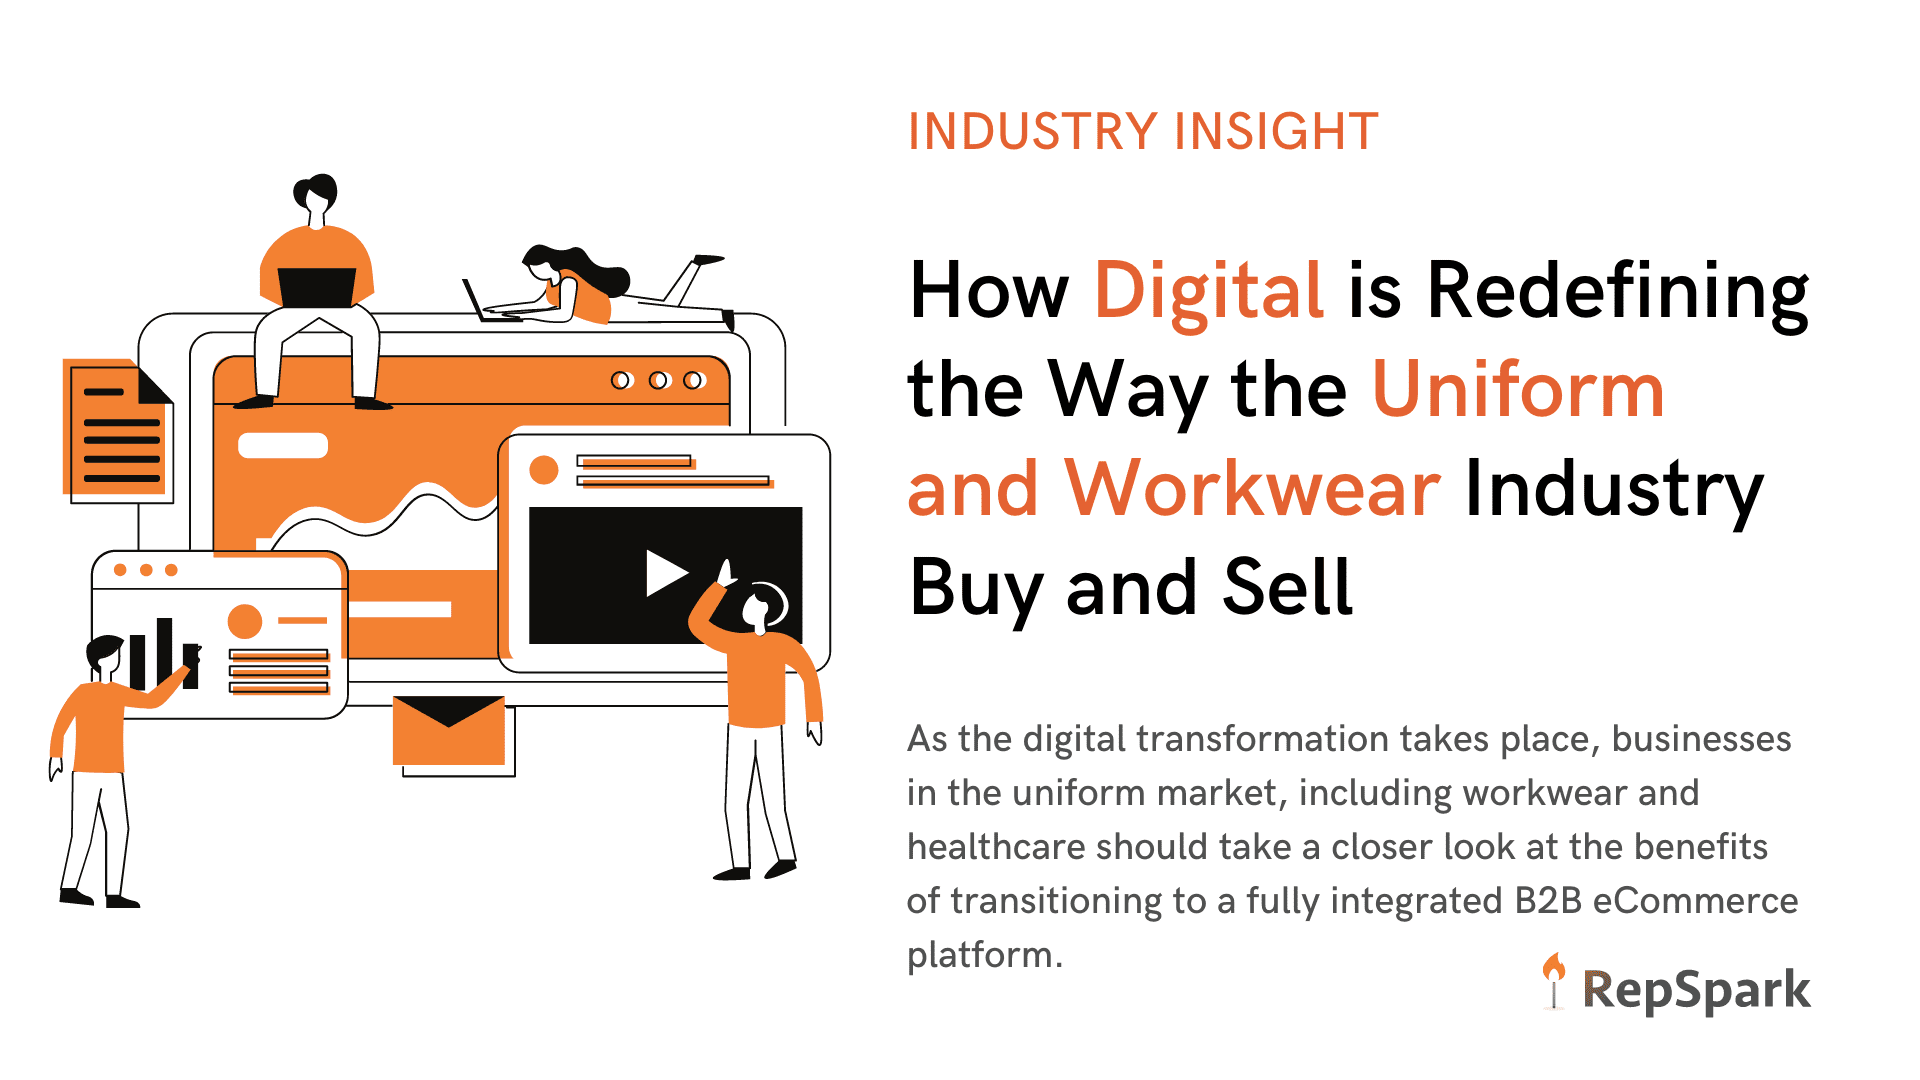 How Digital is Redefining the Way Uniform and Workwear Industries Buy and Sell